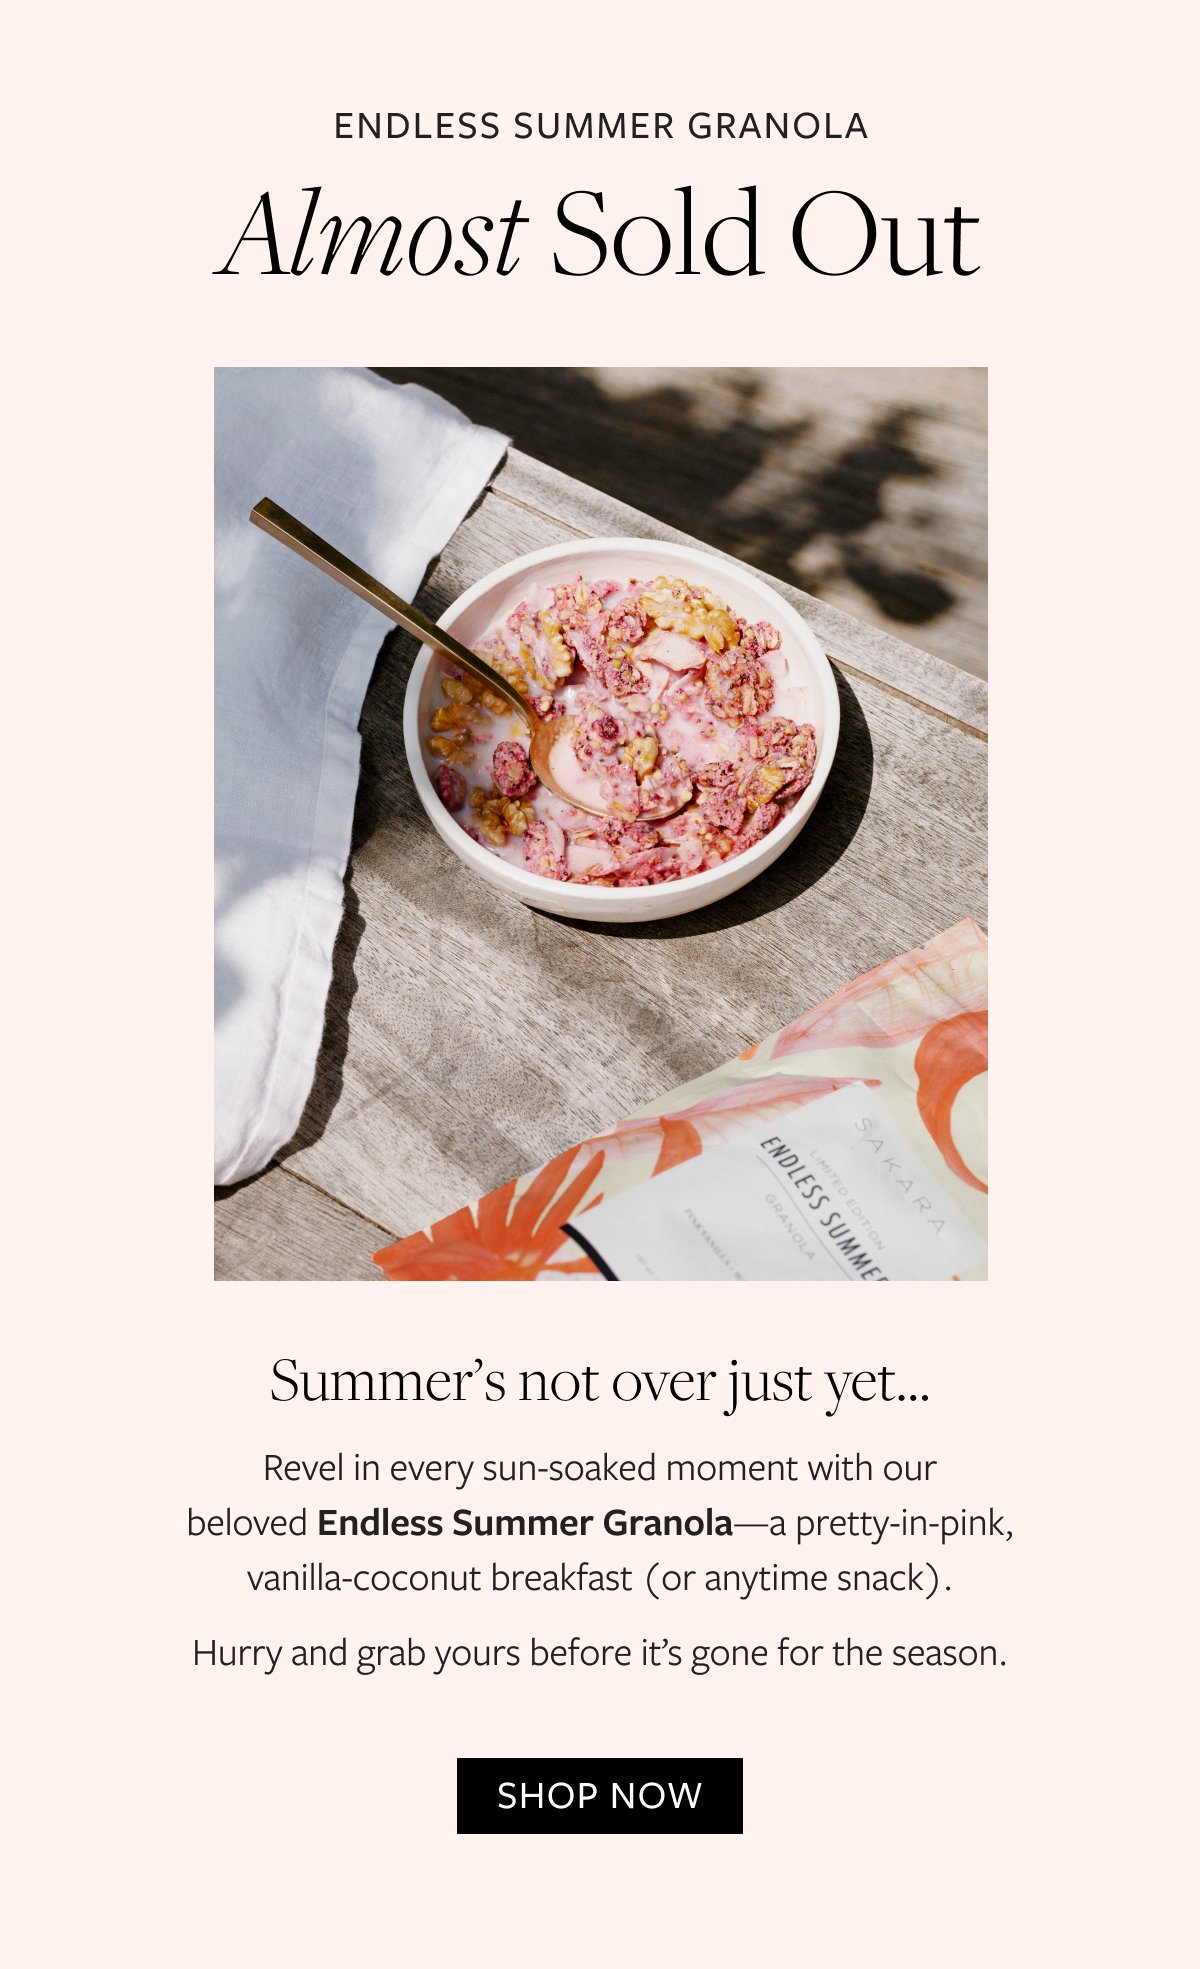 Endless Summer Granola—Almost Sold Out